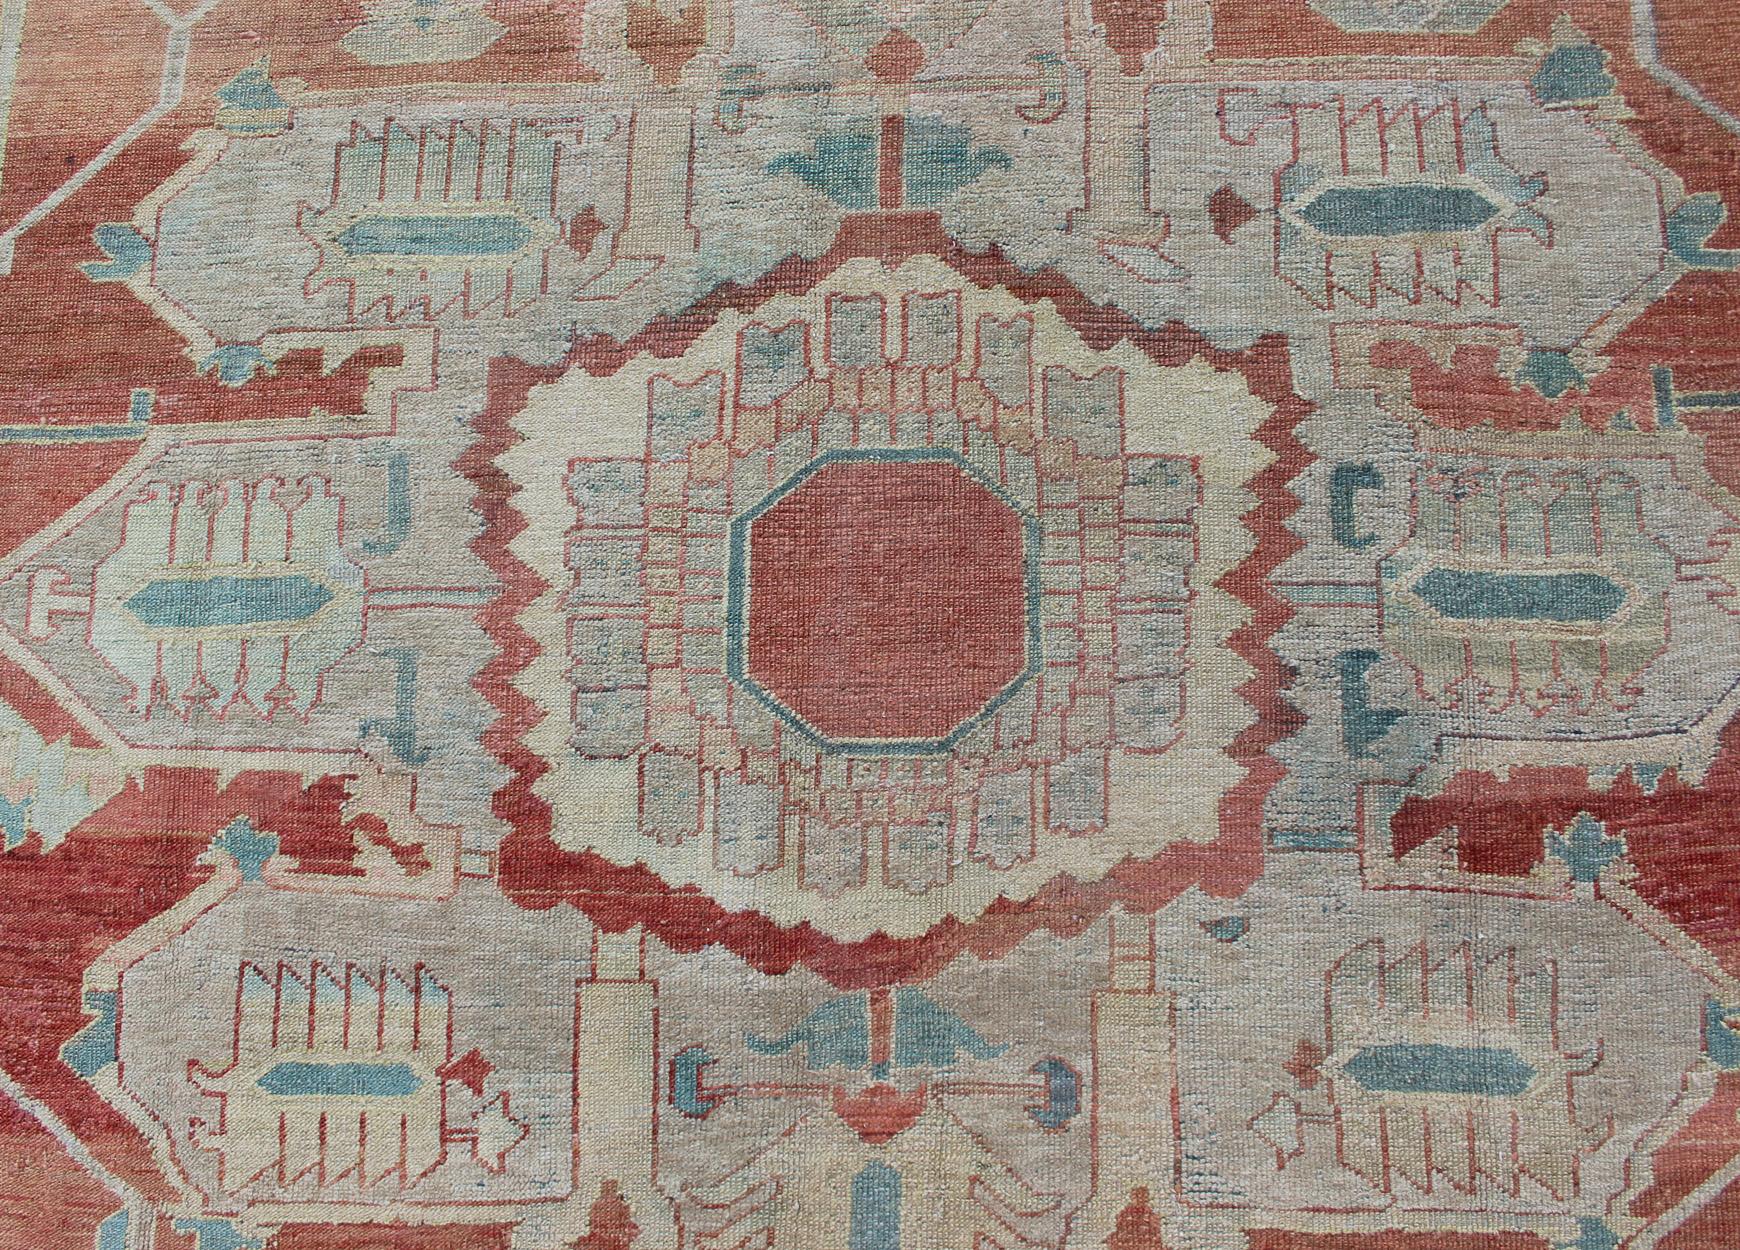 Antique Persian Large Serapi Rug in Soft Red, Taupe, Light Teal and Blue For Sale 5